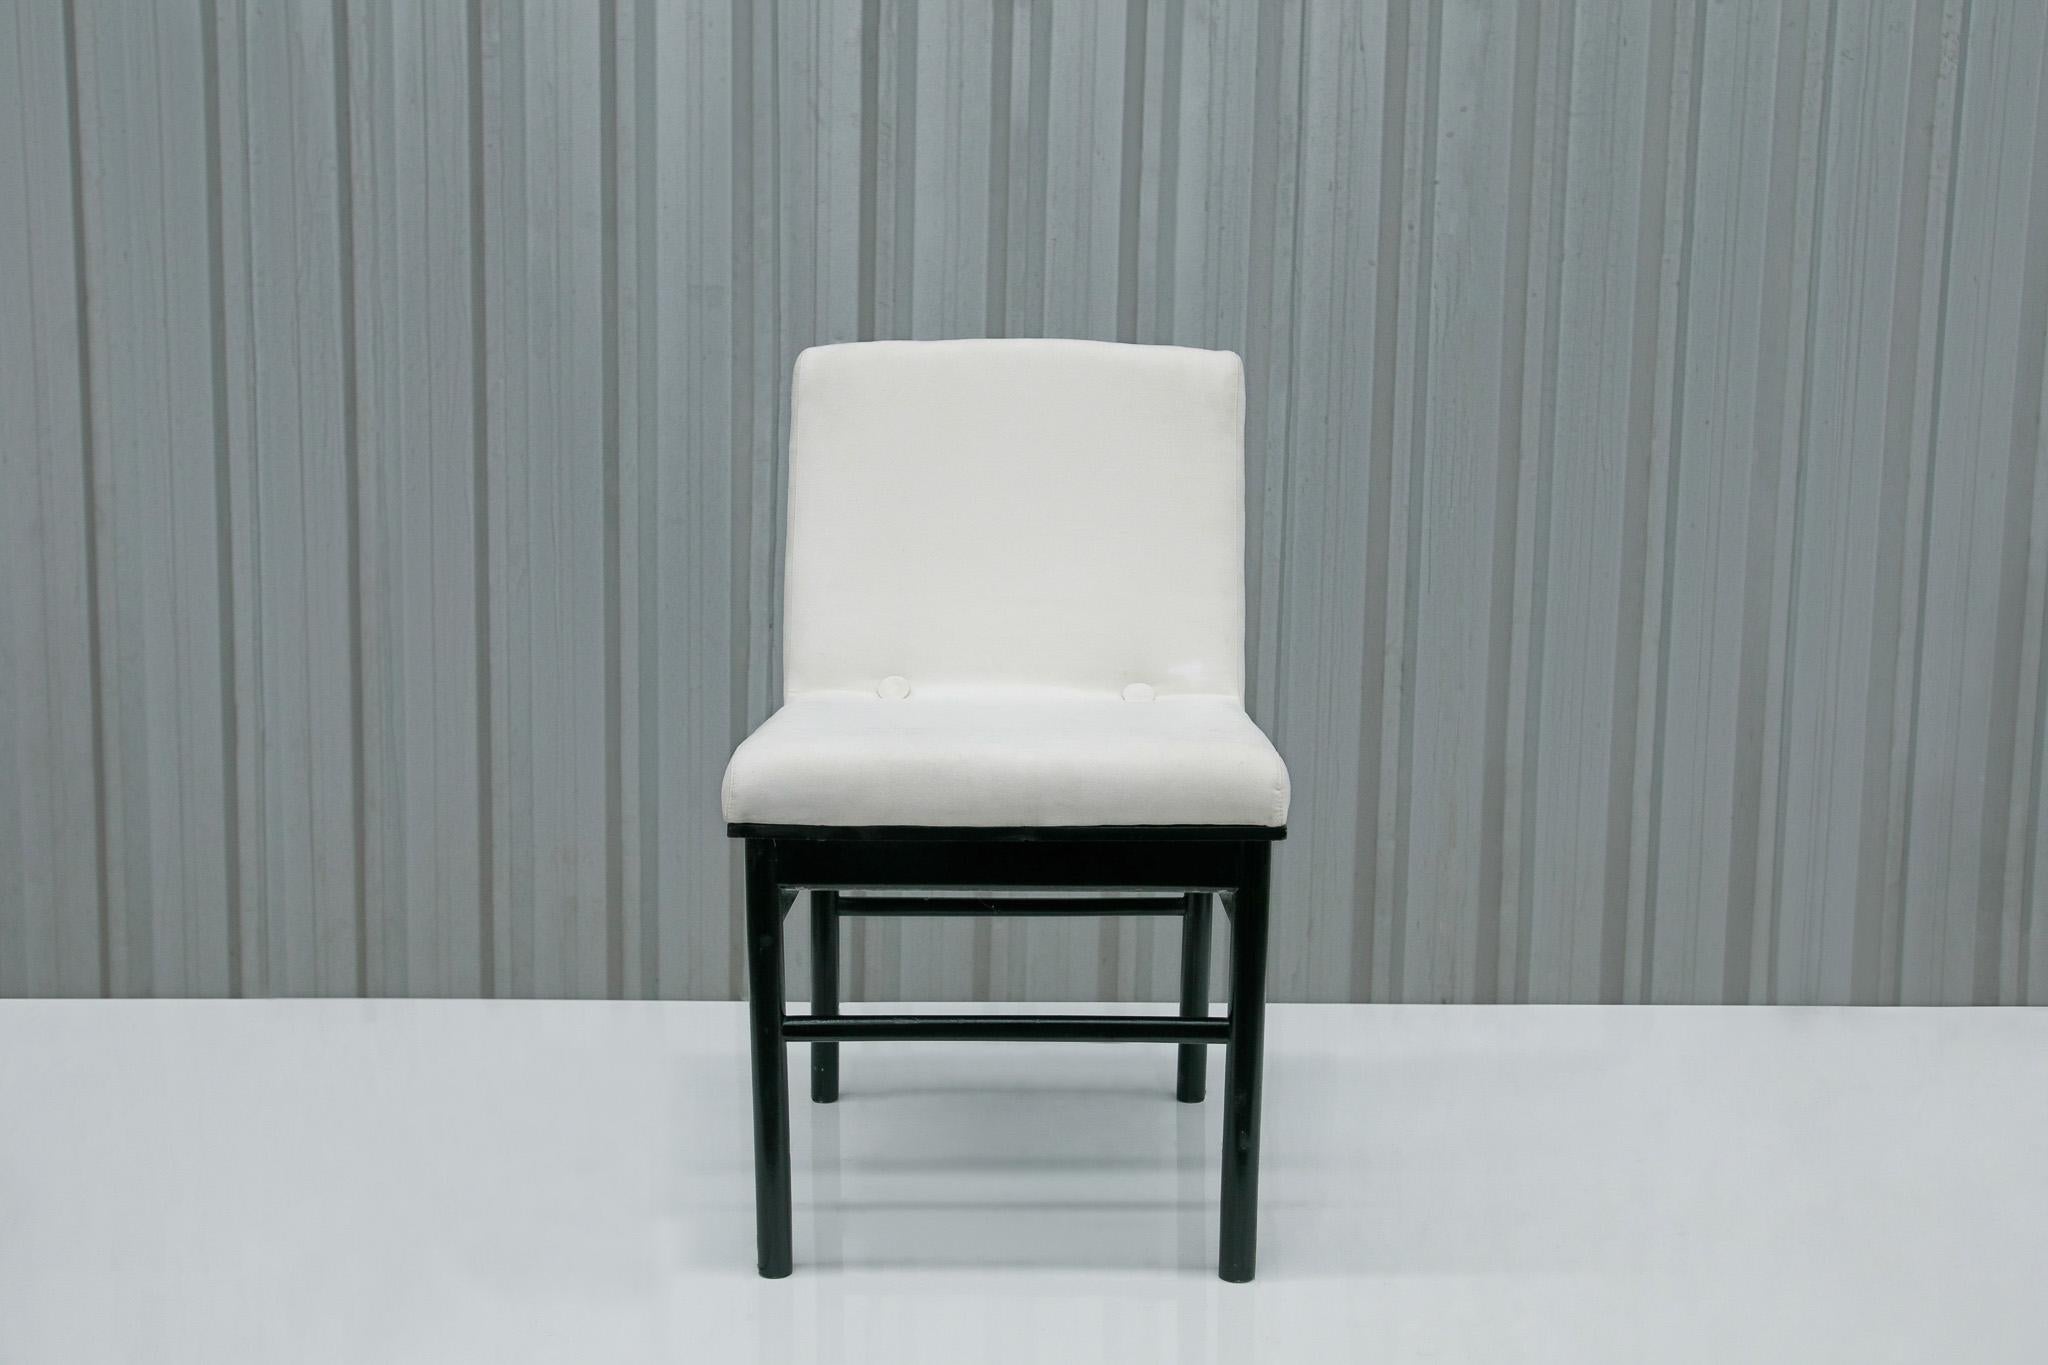 Available now, this very Brazilian Modern six chair set in off white velvet and hardwood with Ebony finish, designed by Novo Rumo is simply spectacular!

Each chair features a hardwood structure with four legs. The seat and backrest are one piece